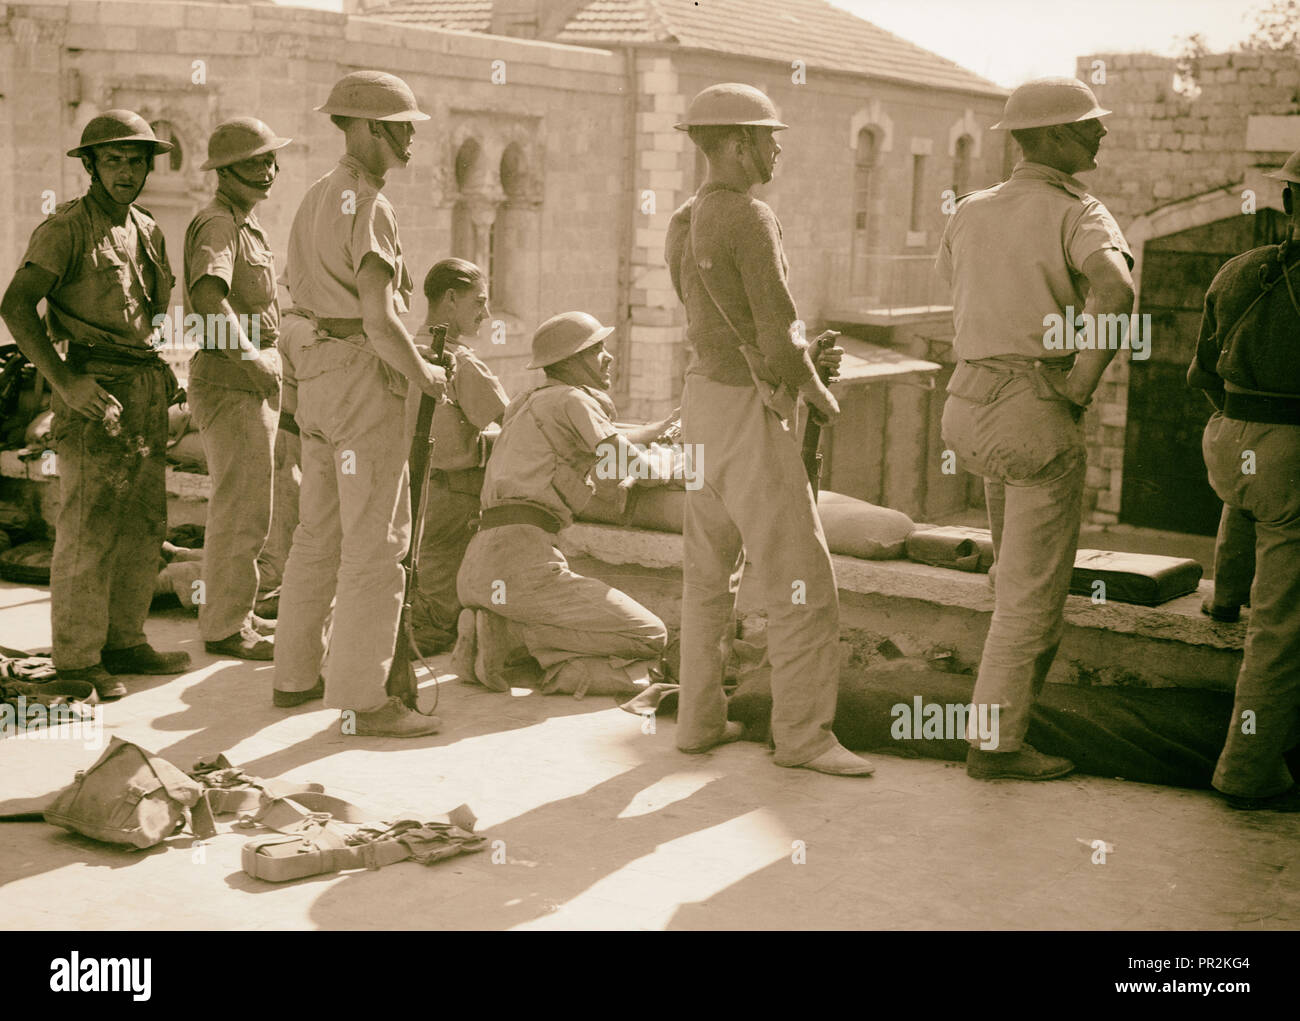 Troops behind sand bags on wall of French hospital. Close-up view of New Gate, Jerusalem, Israel Stock Photo